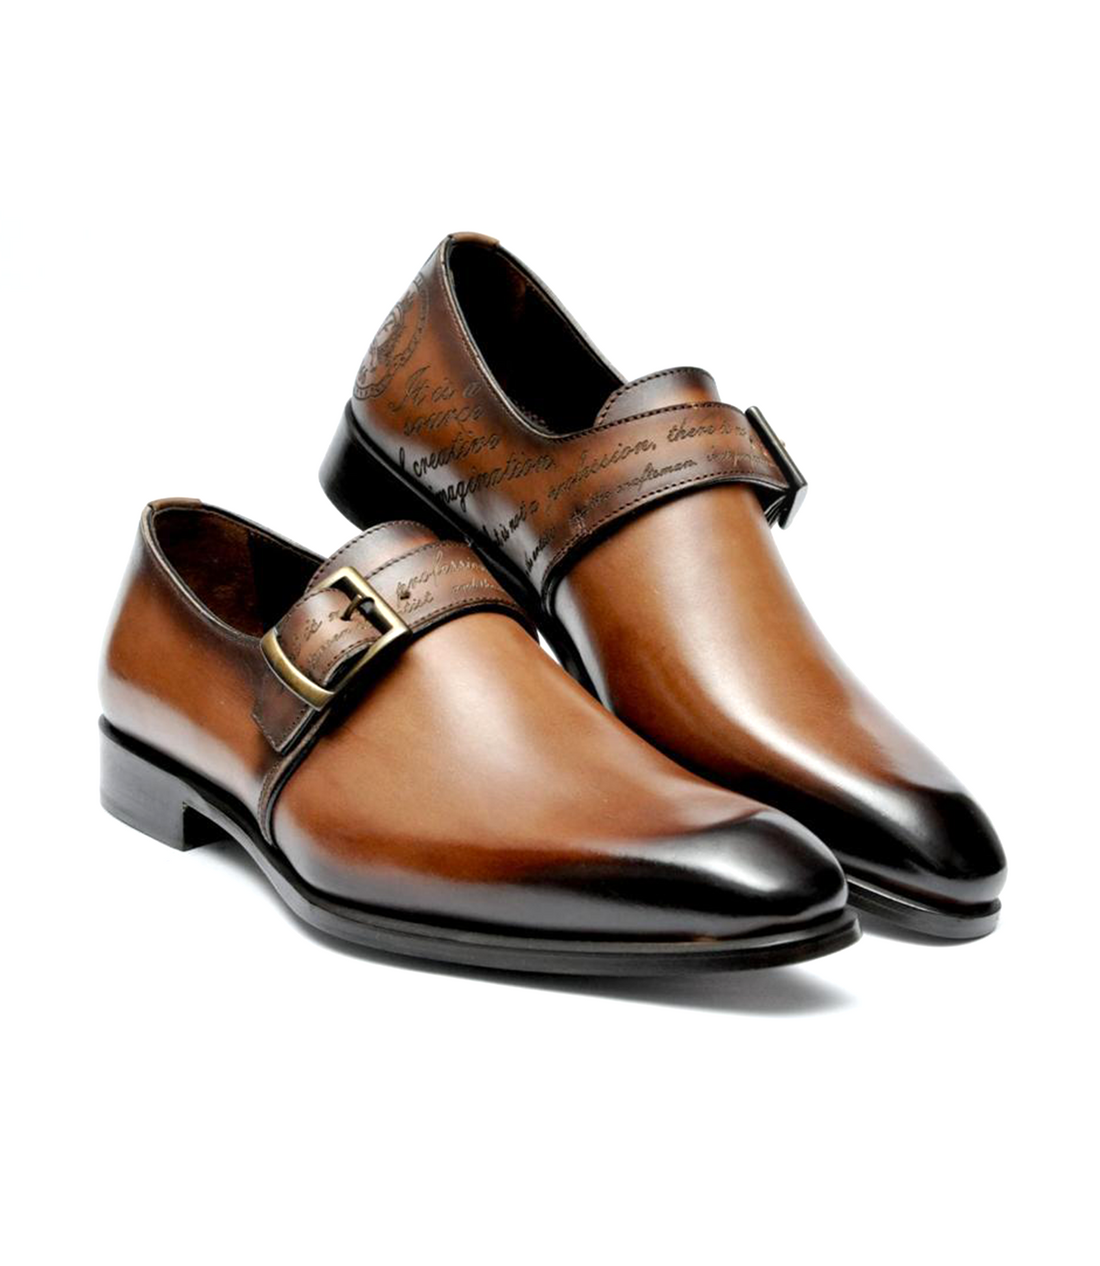 FILANGIERI - STAINED BROWN CURSIVE SINGLE MONK LEATHER DRESS SHOE